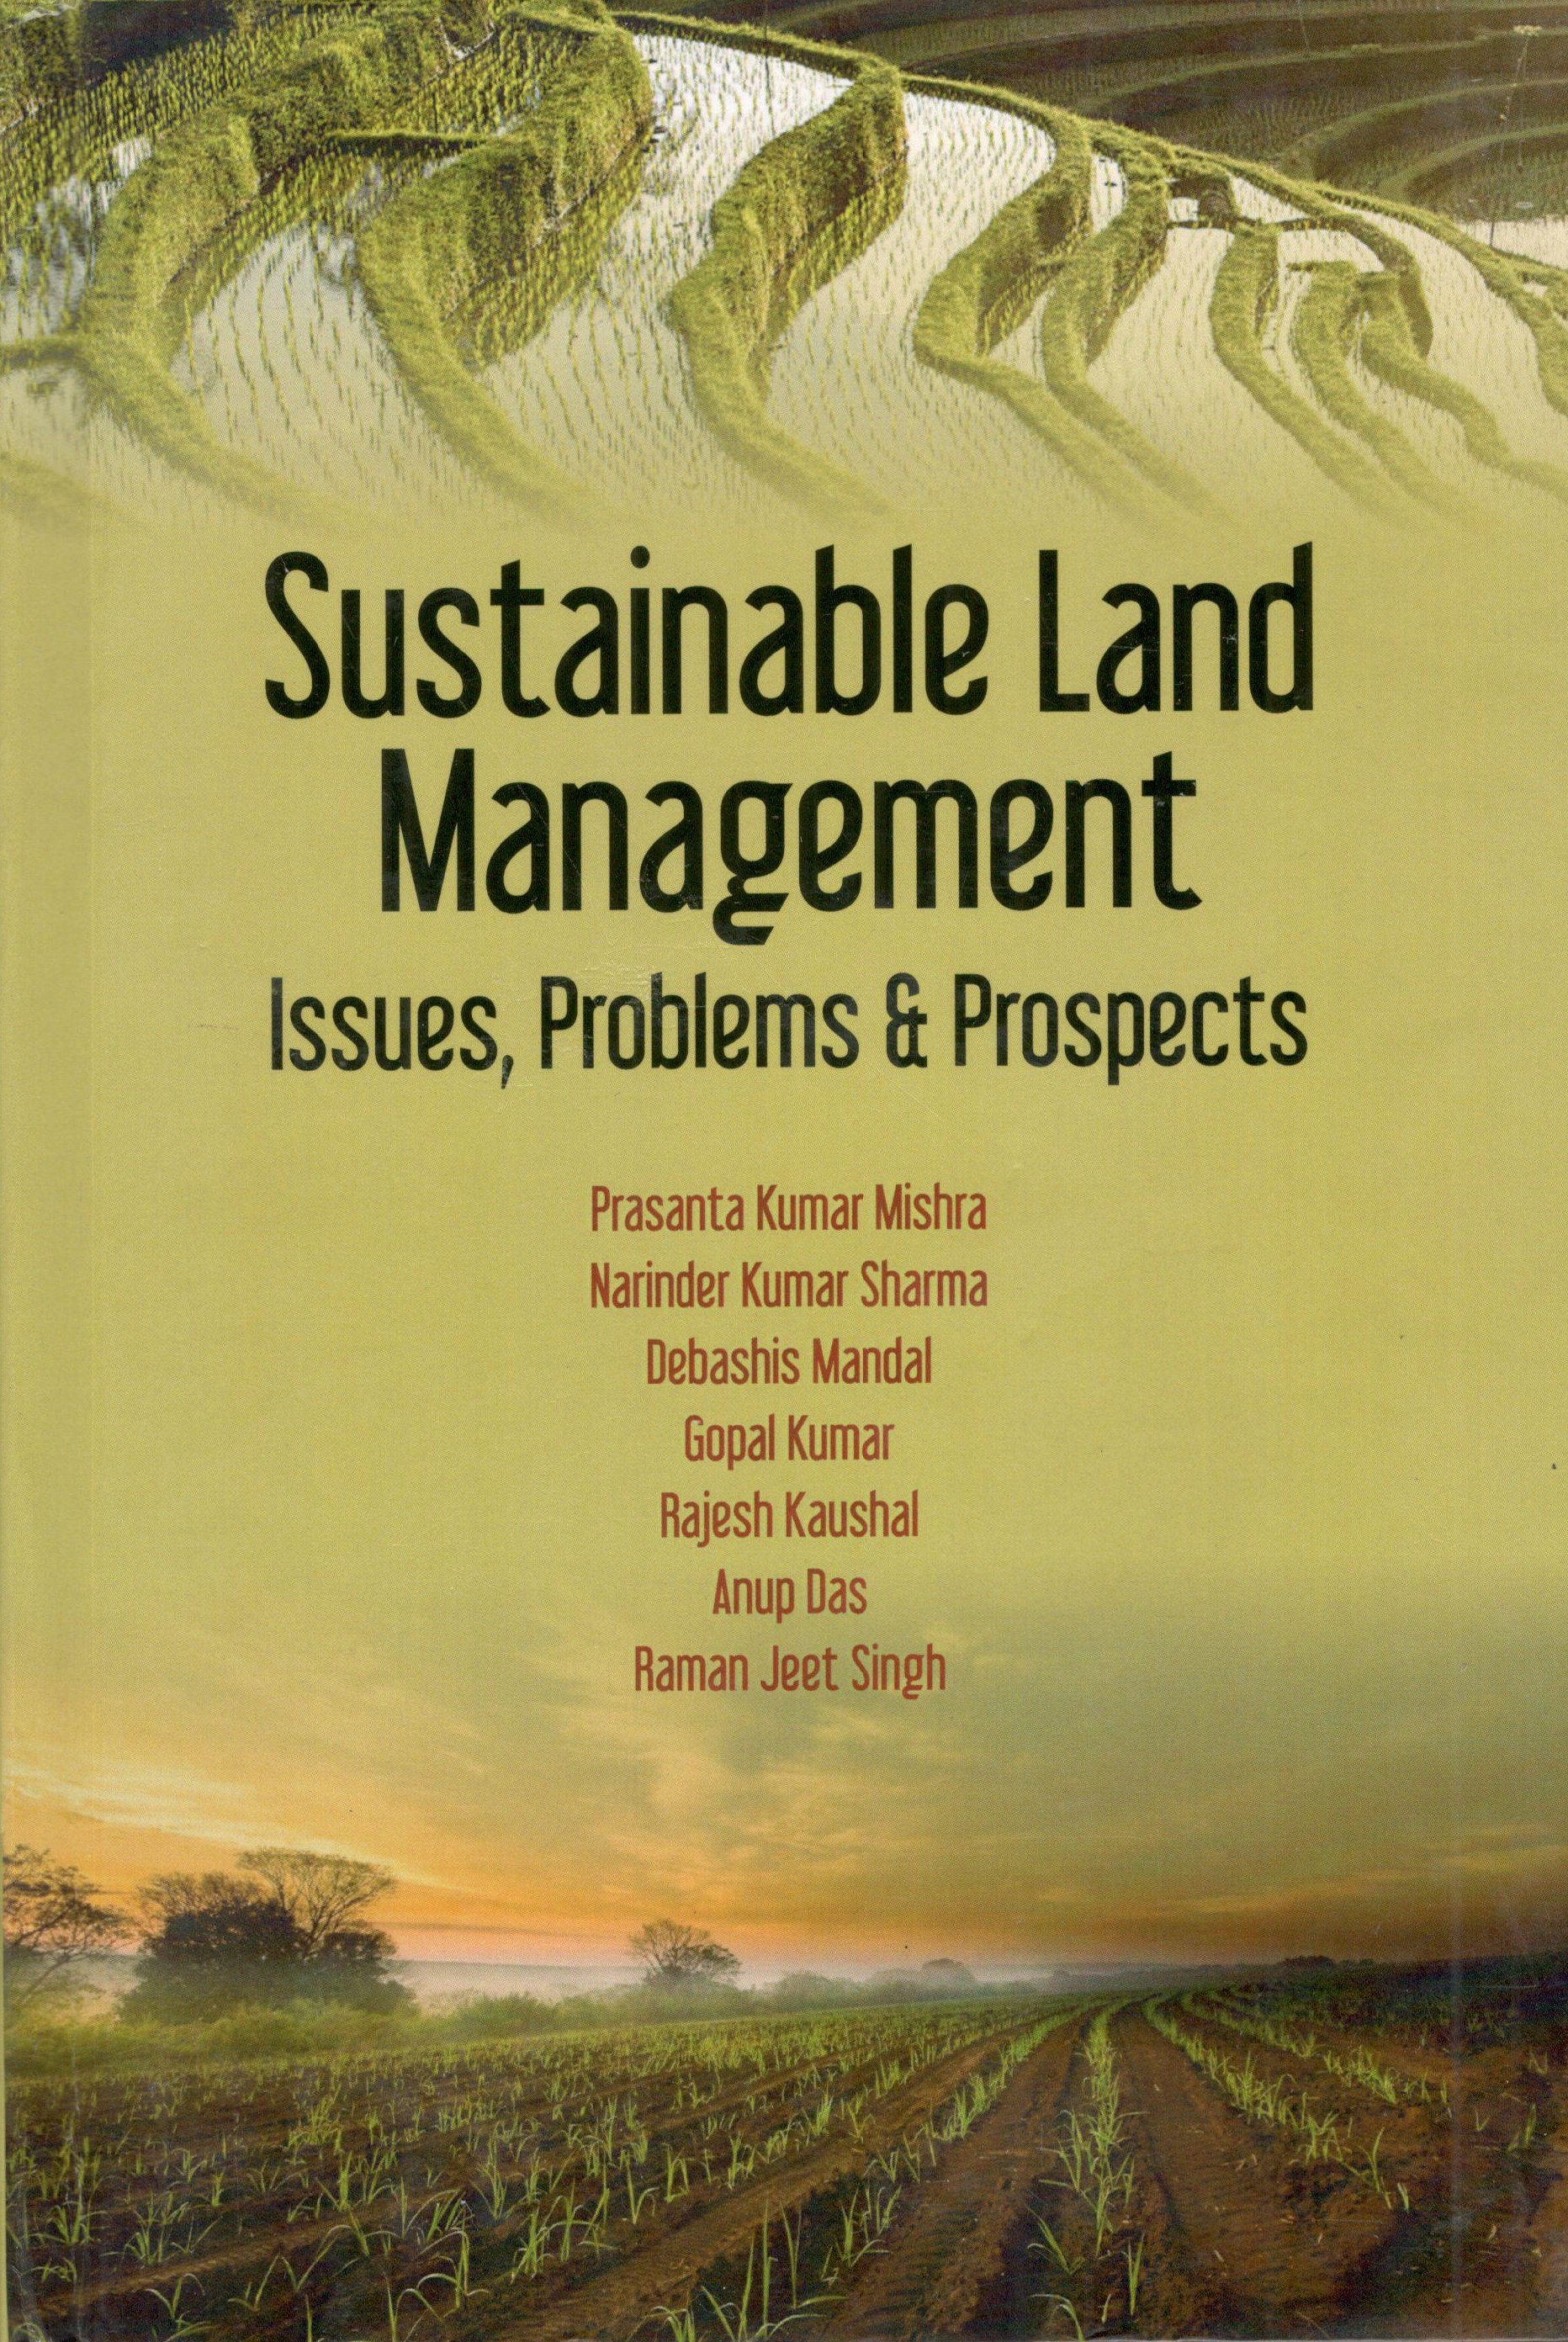 Sustainable Land Management Issues Problems & Prospects